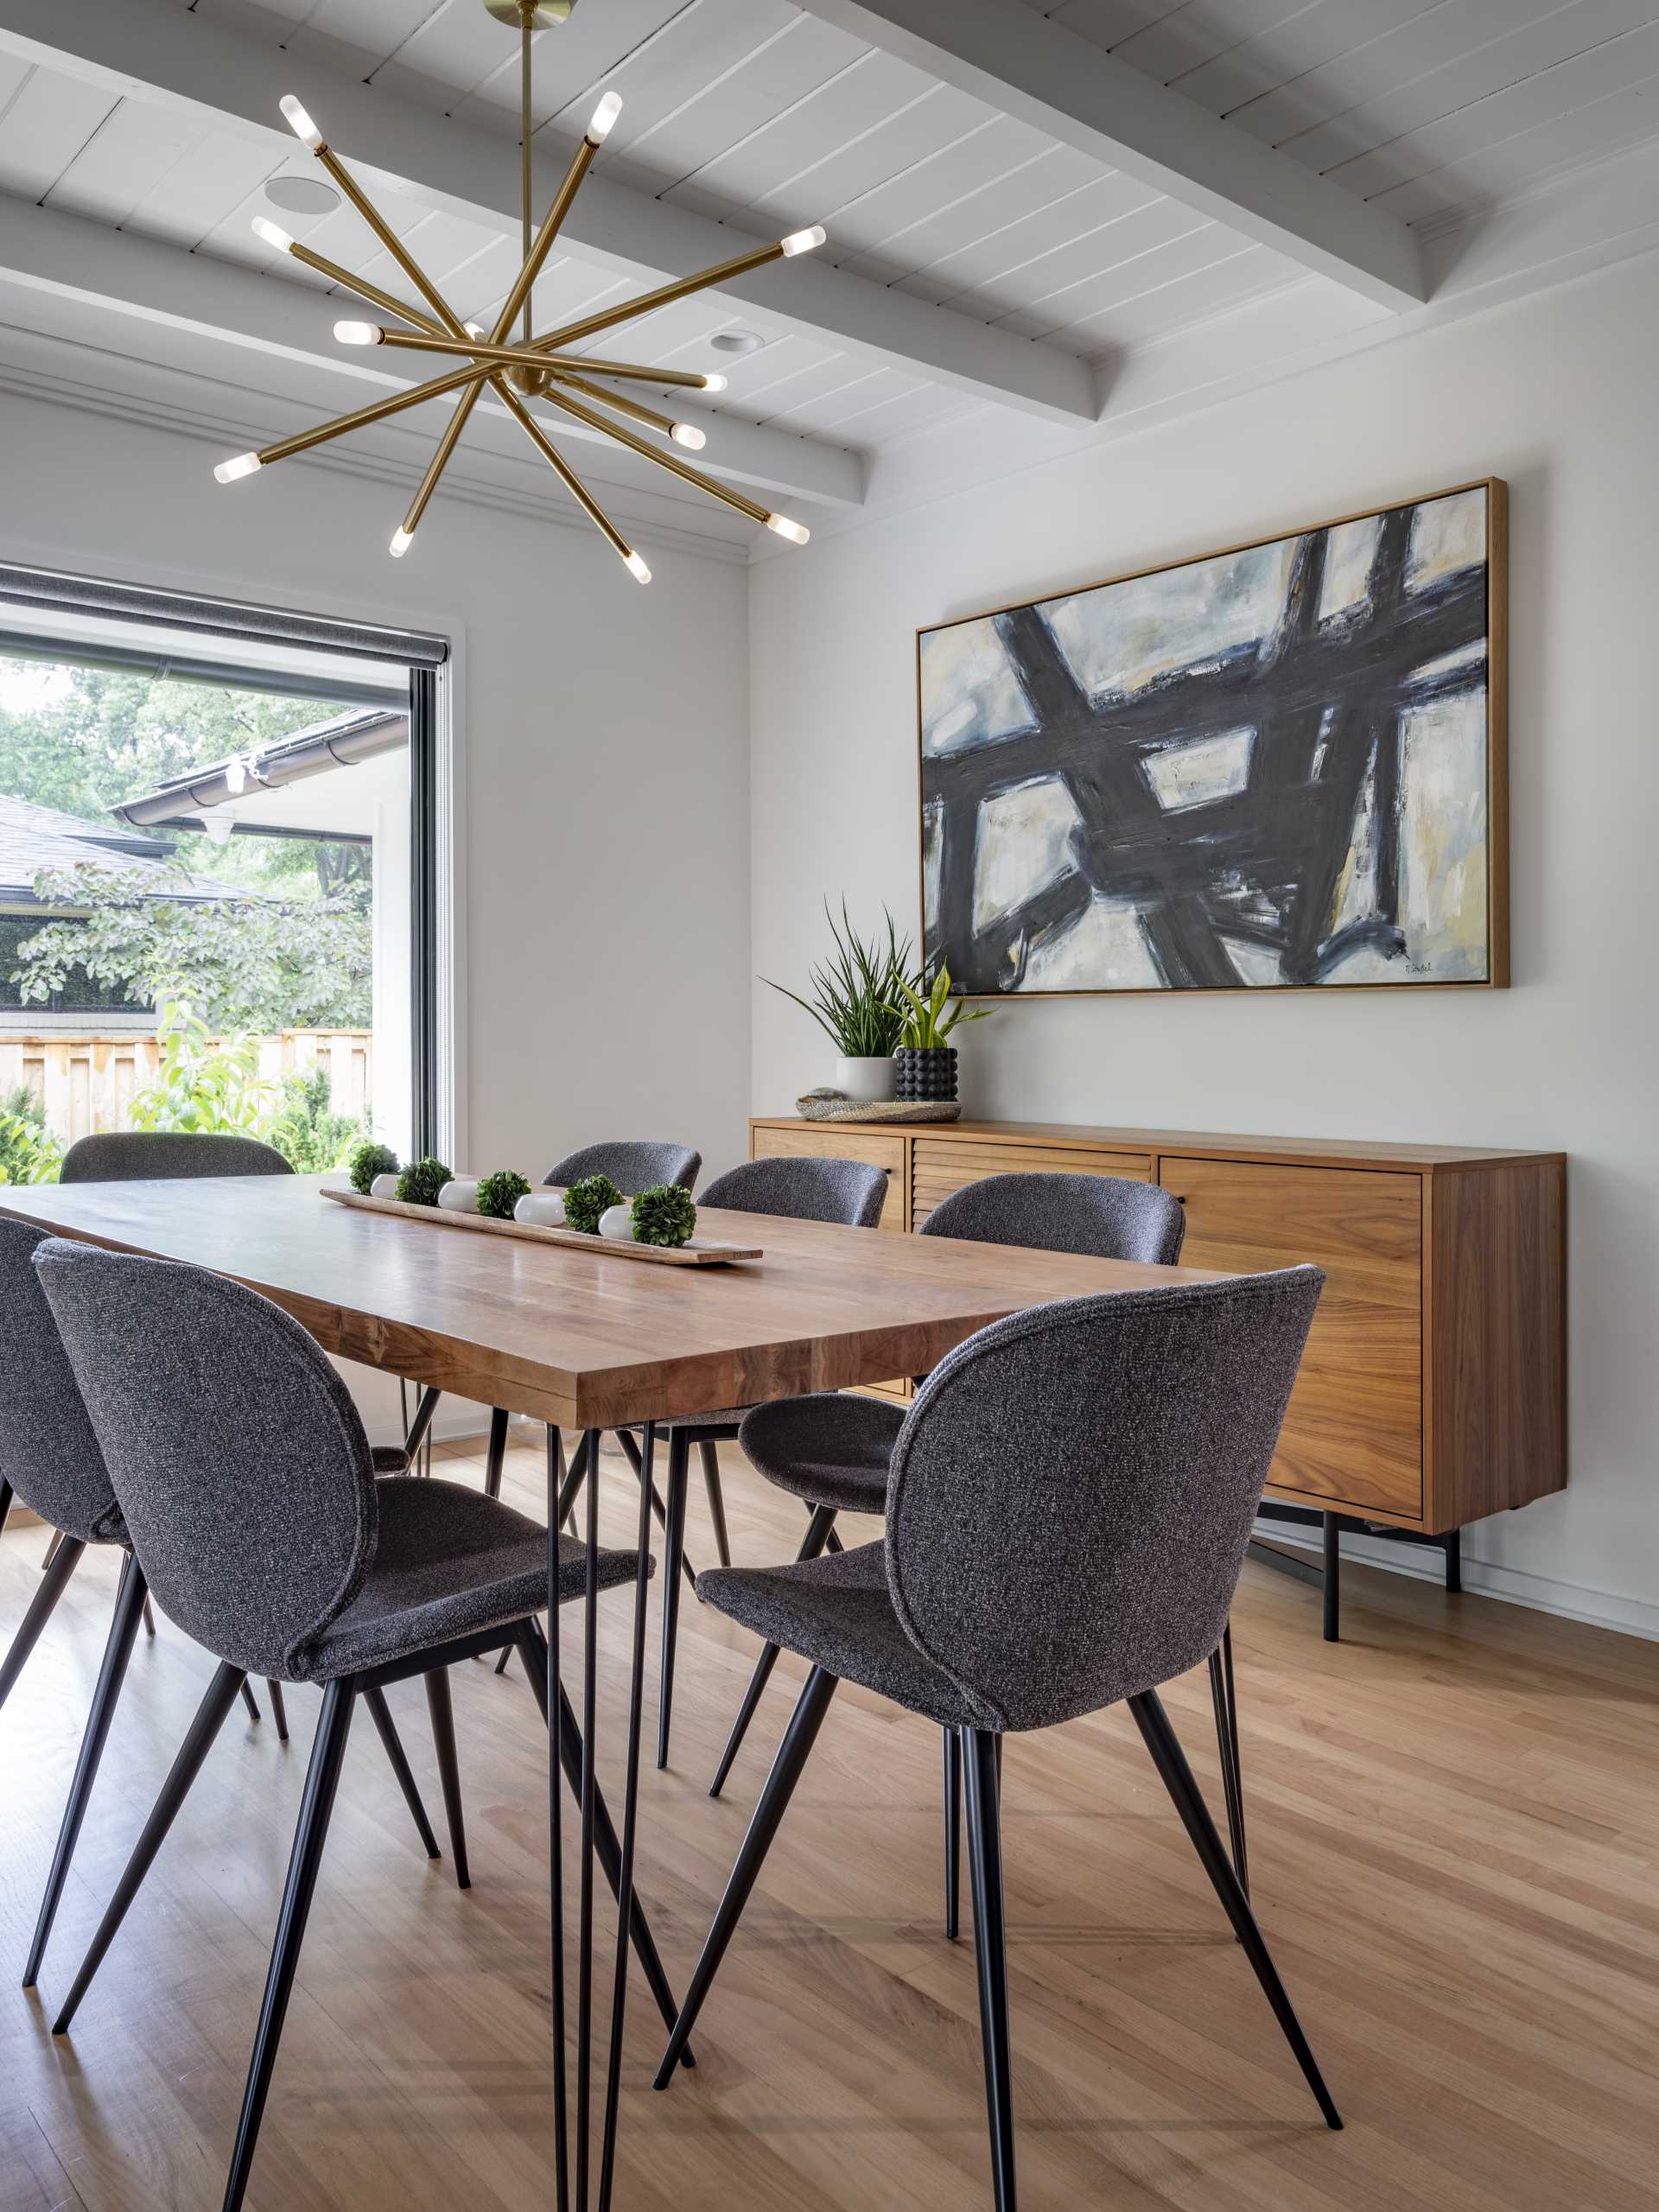 In the dining room, a wood dining table is surrounded by grey upholstered chairs with black legs that match the table design.